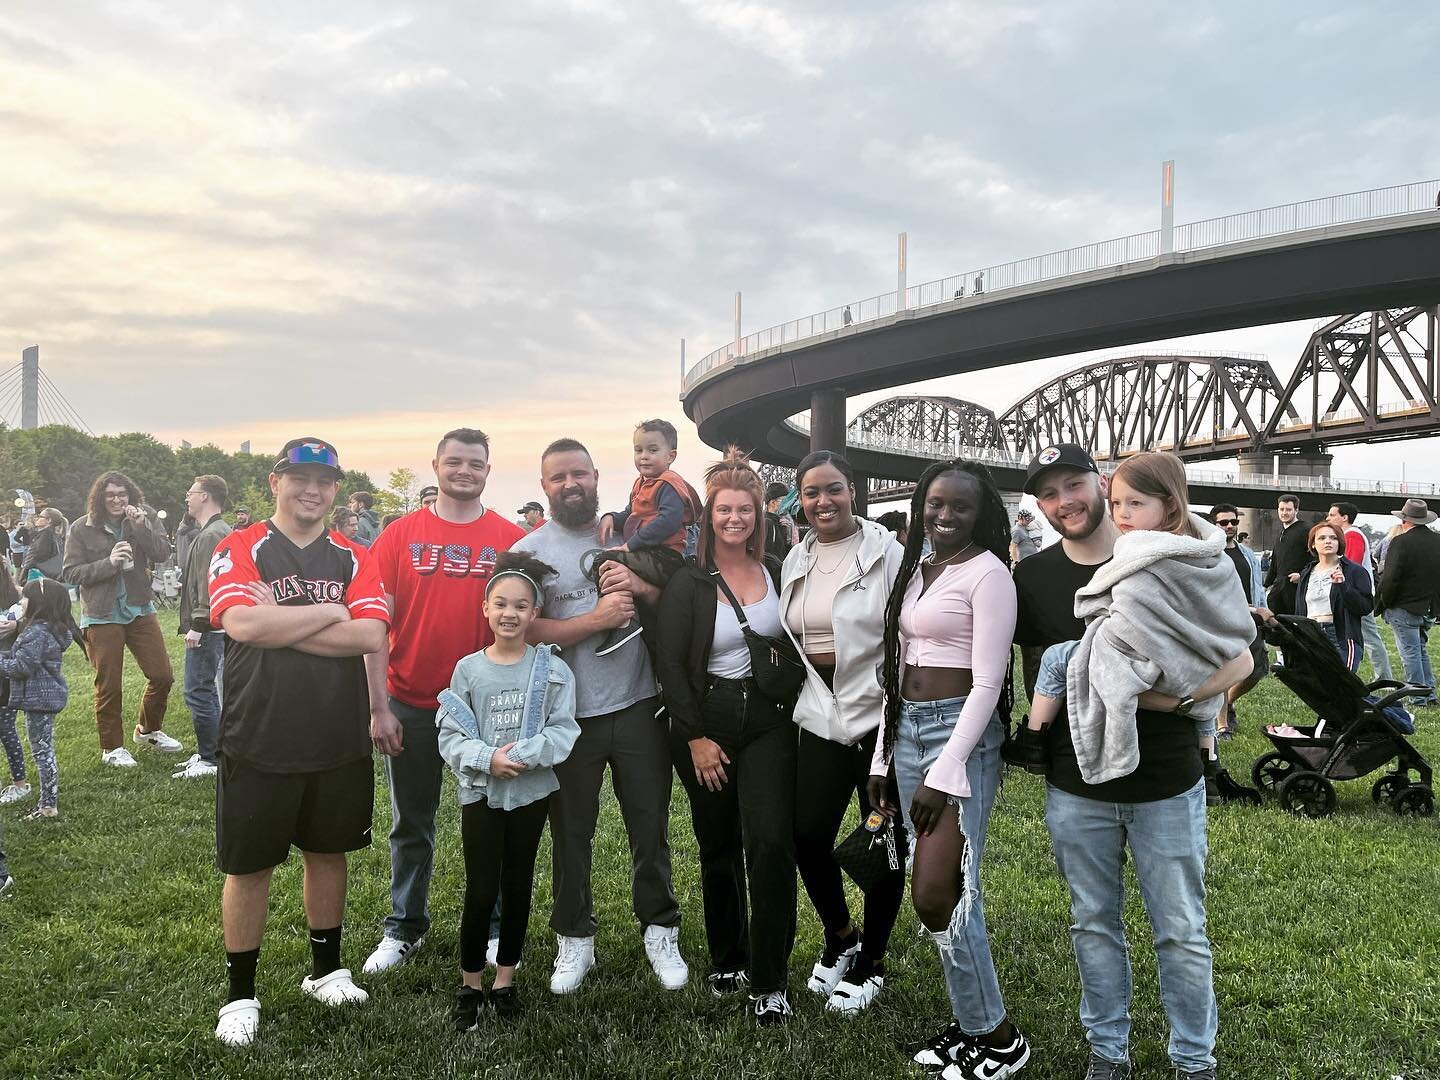 Black Panda at Waterfront Wednesday! Team events and a great work culture are a huge part of our business and success.  #Kids #Family #Fun #502 #Louisville #Waterfront #GoodTimes #HardlyWork